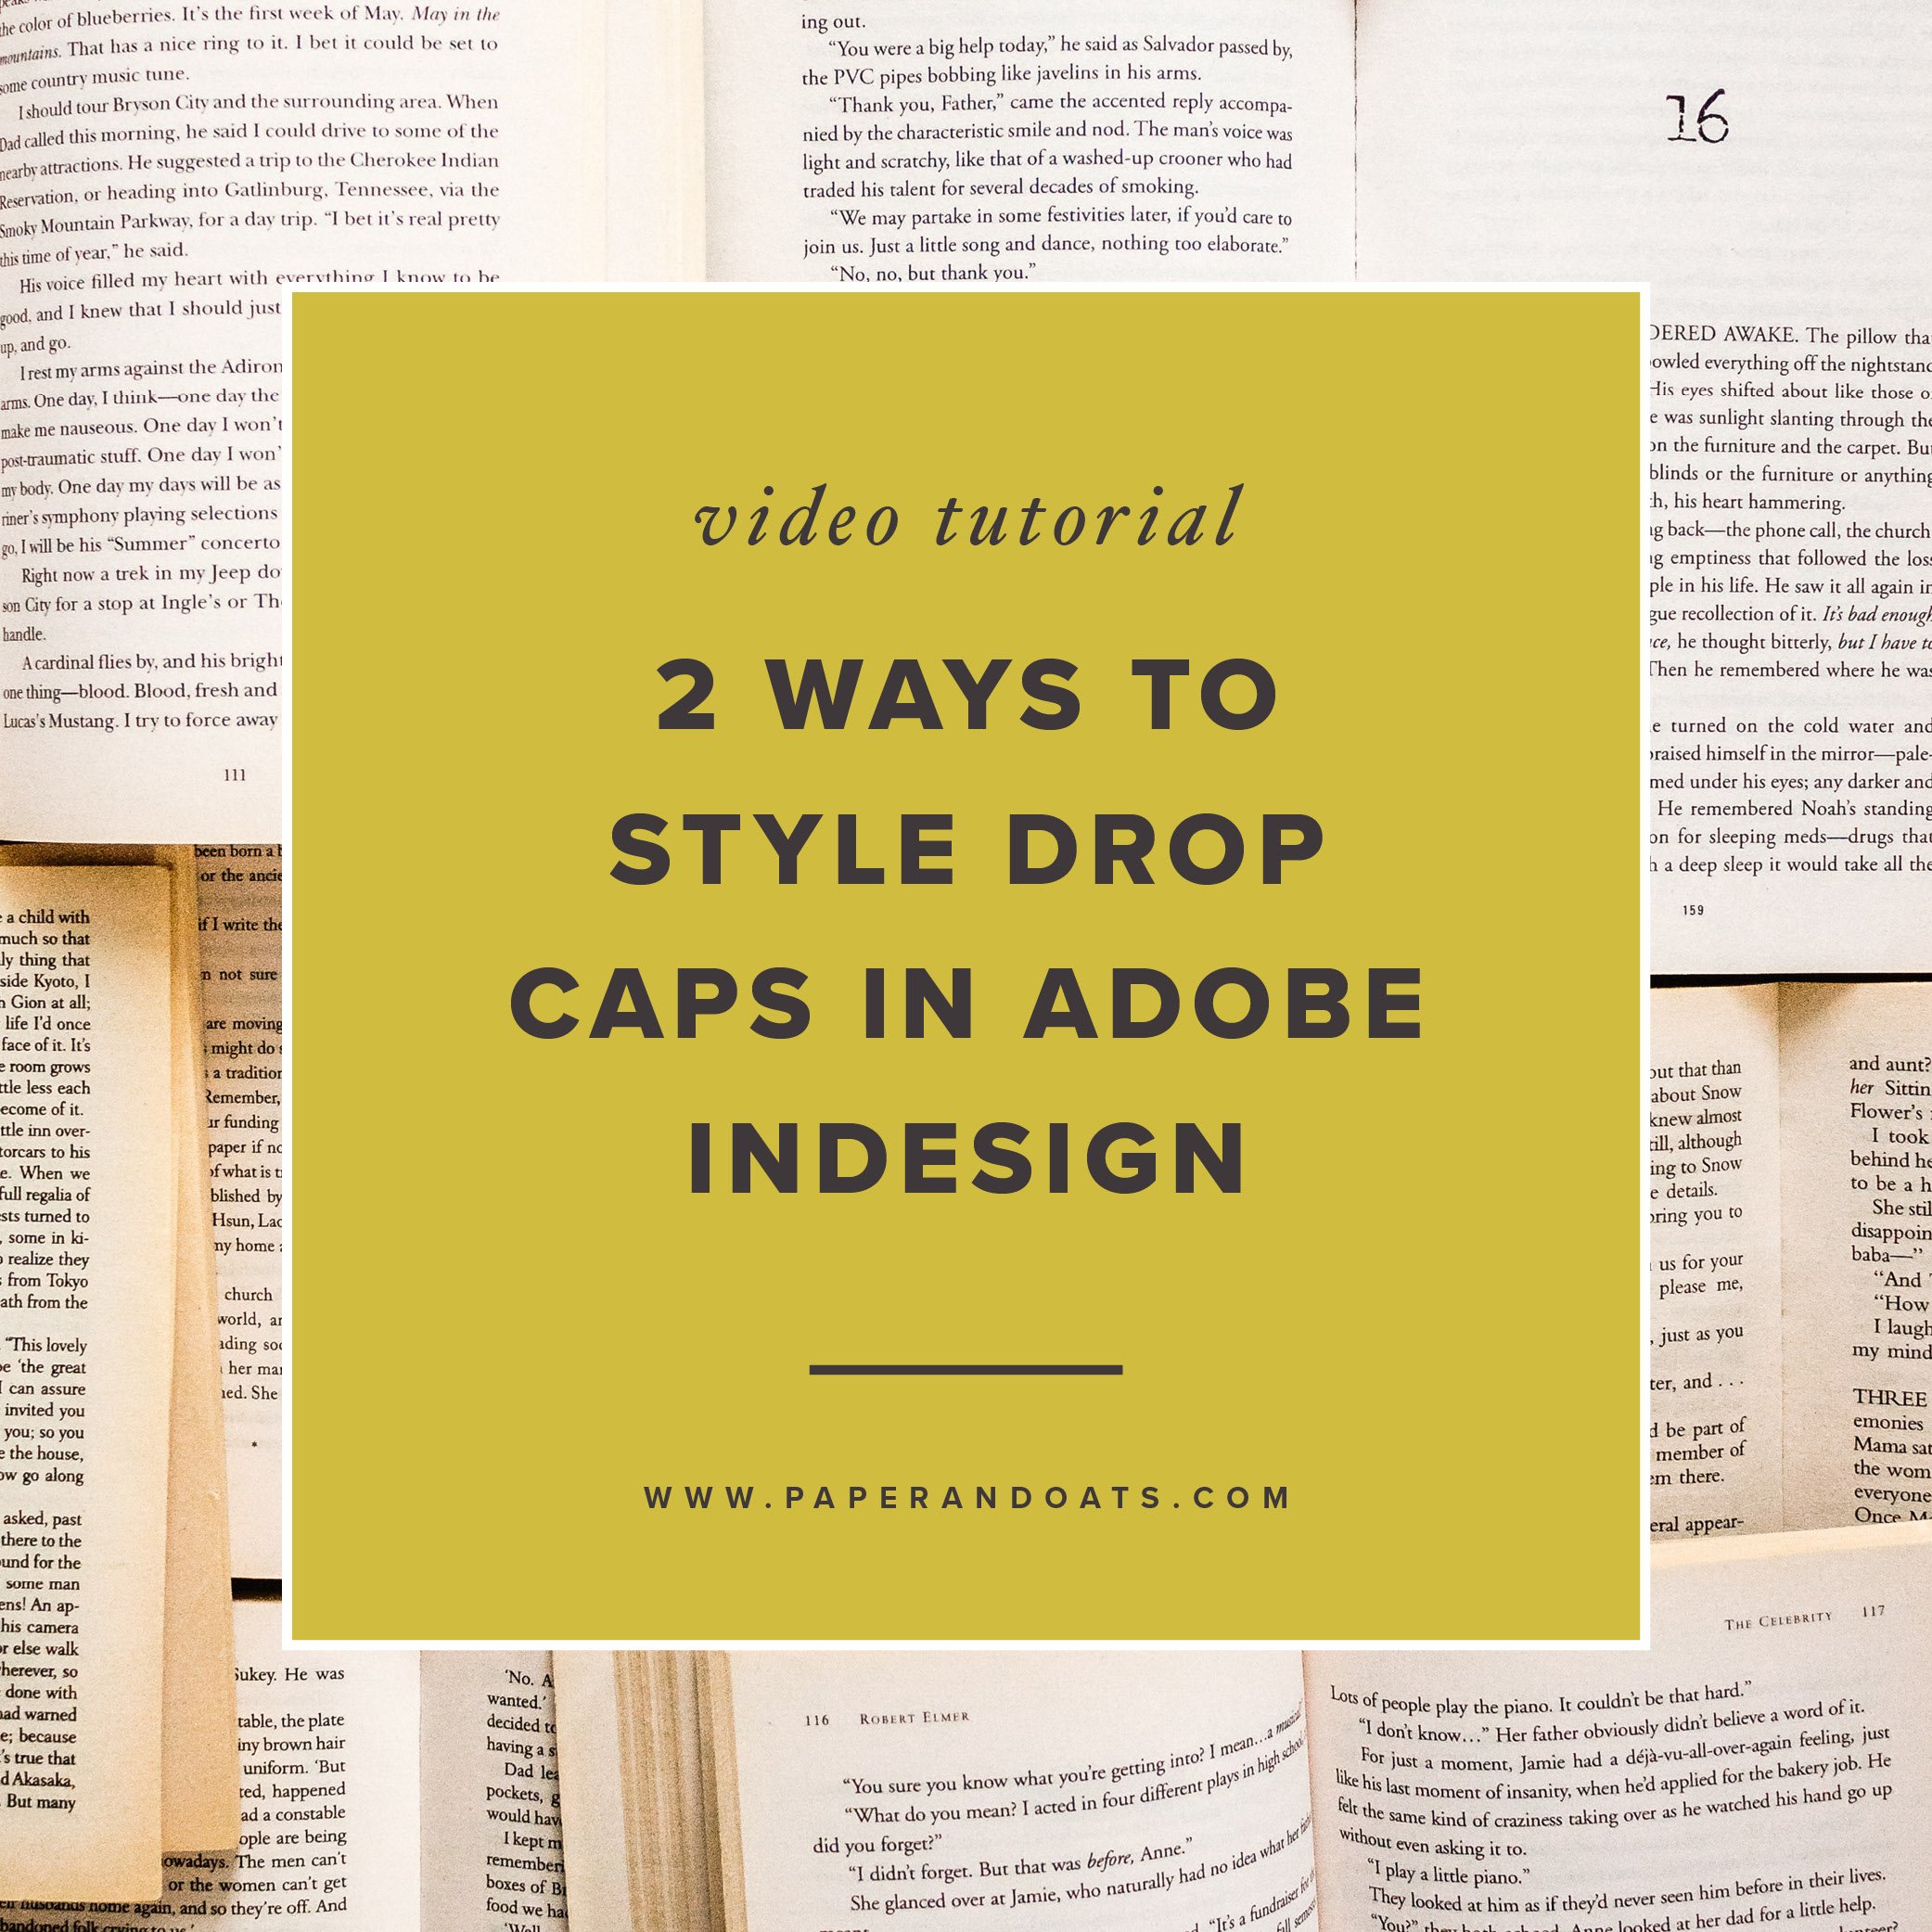 Two ways to style drop caps in Adobe InDesign — Paper + Oats